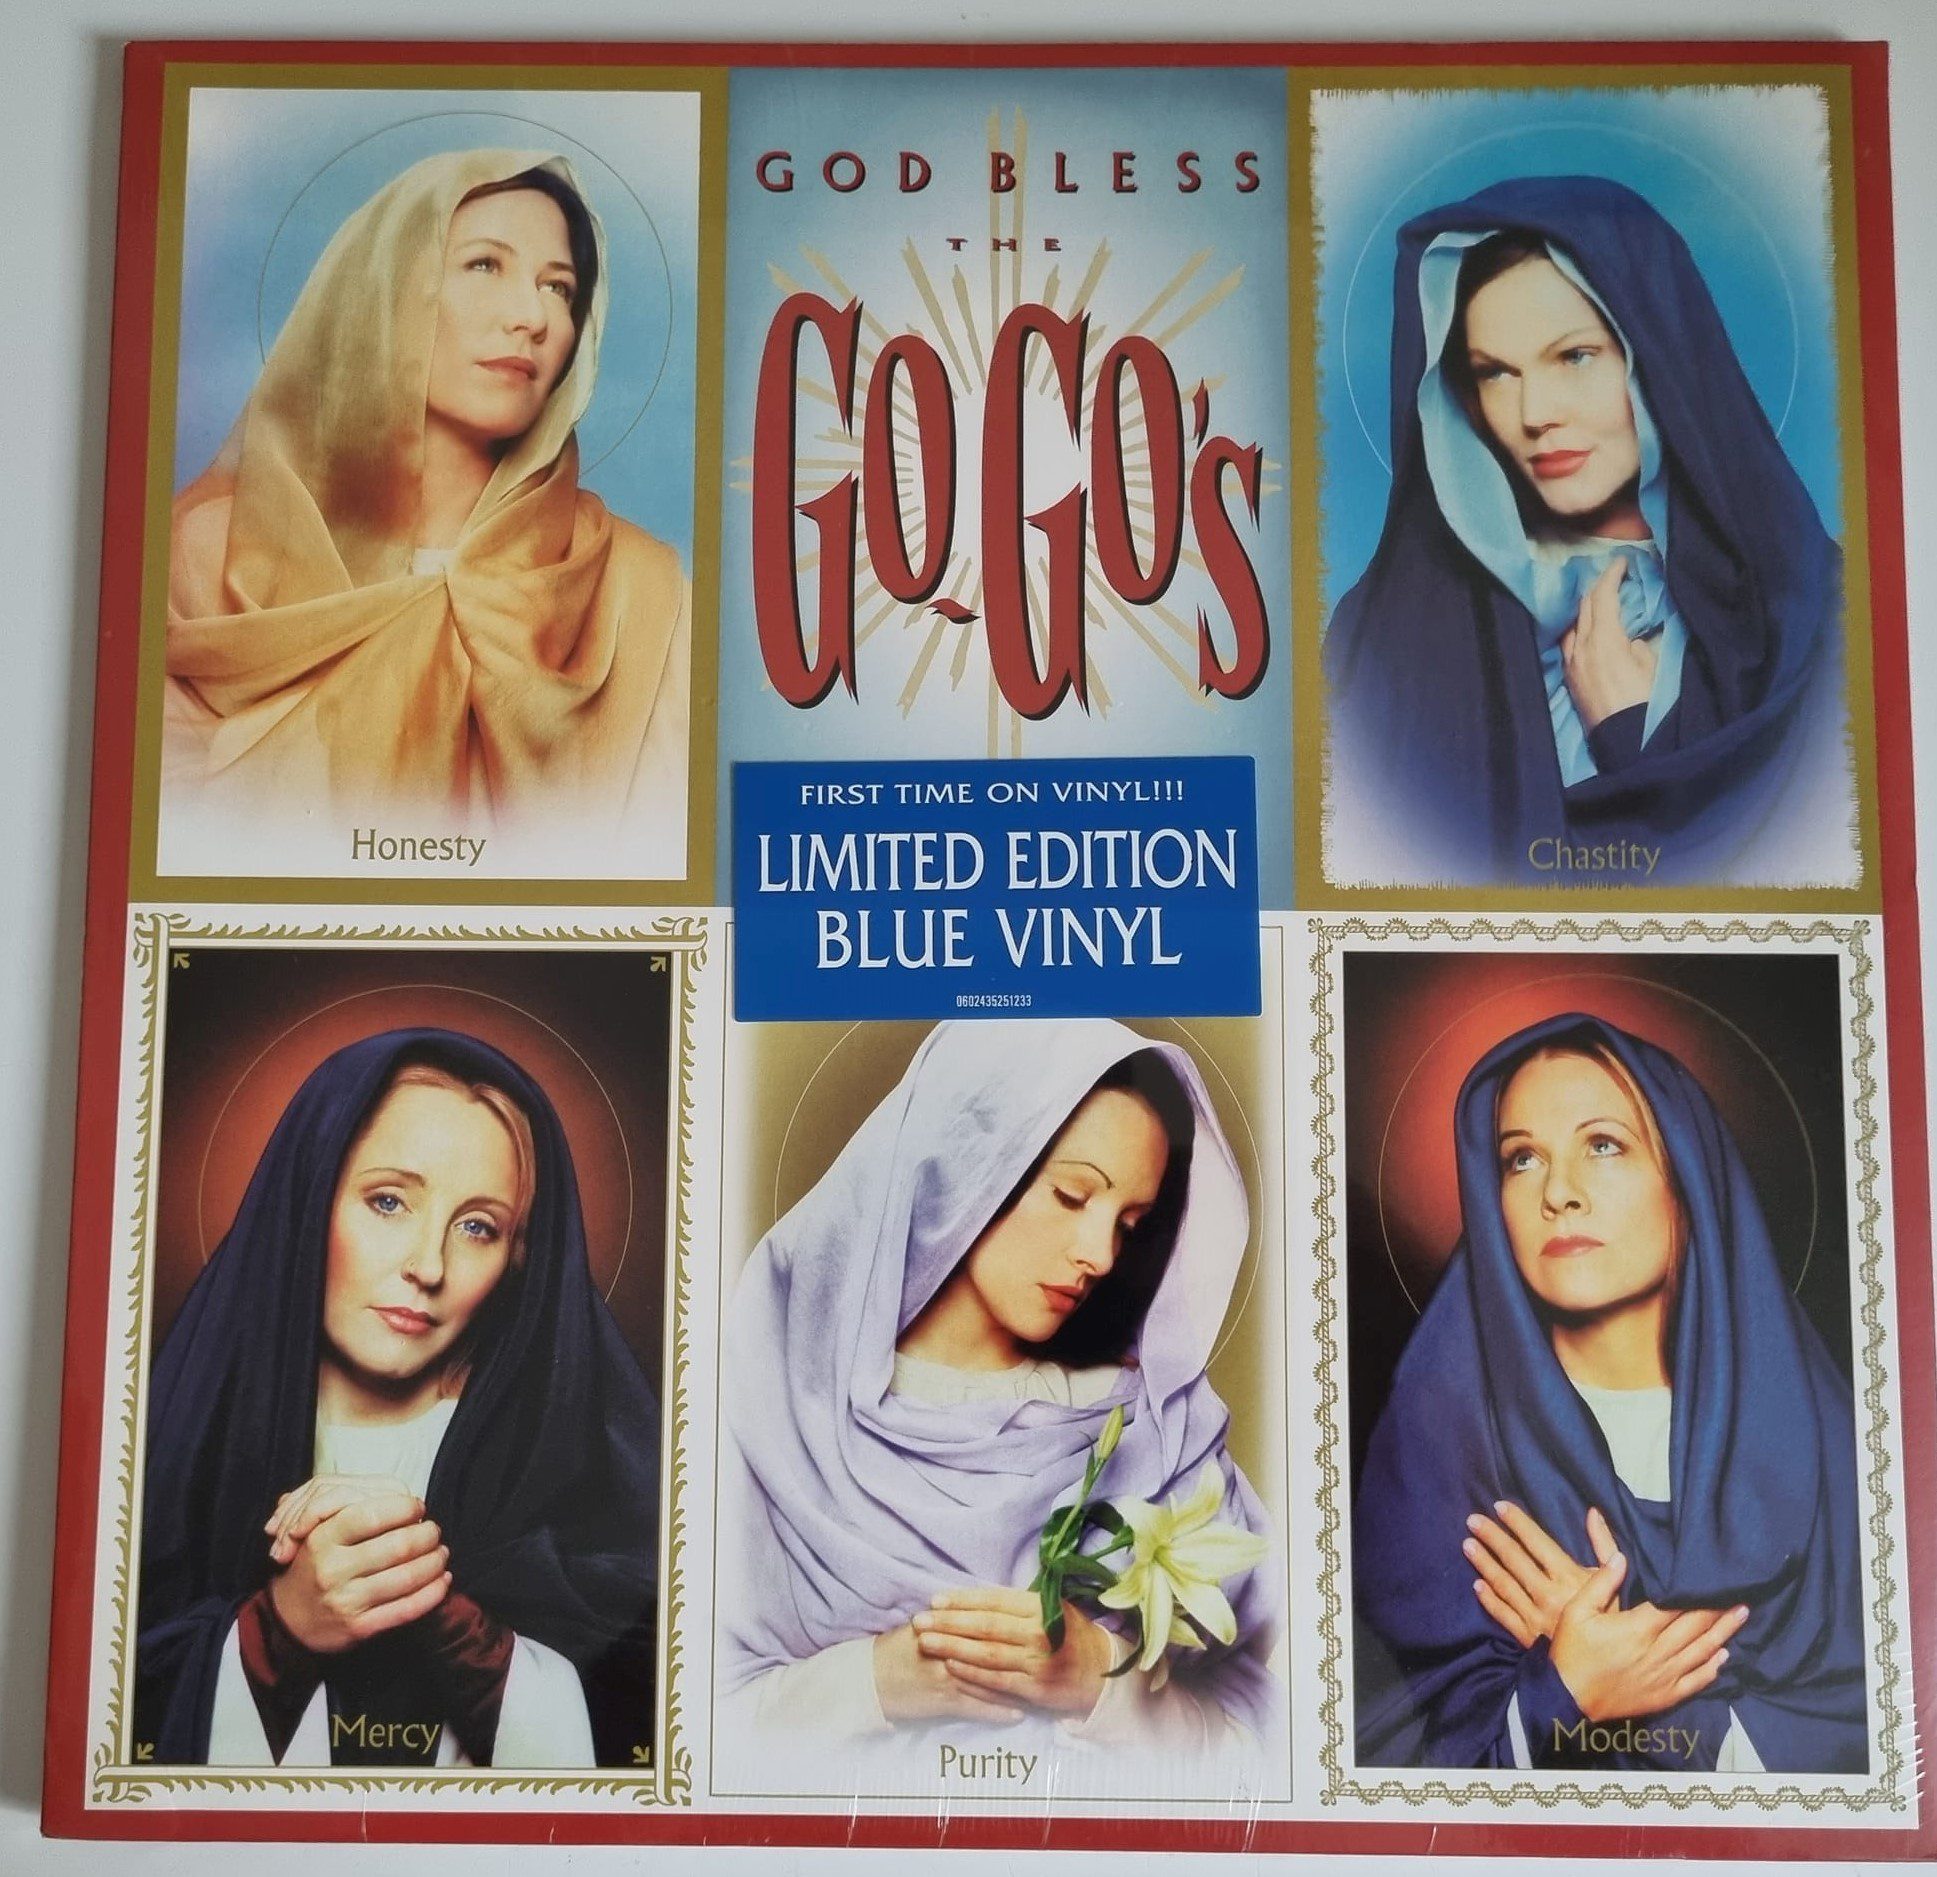 Buy this rare Go Go's record by clicking here